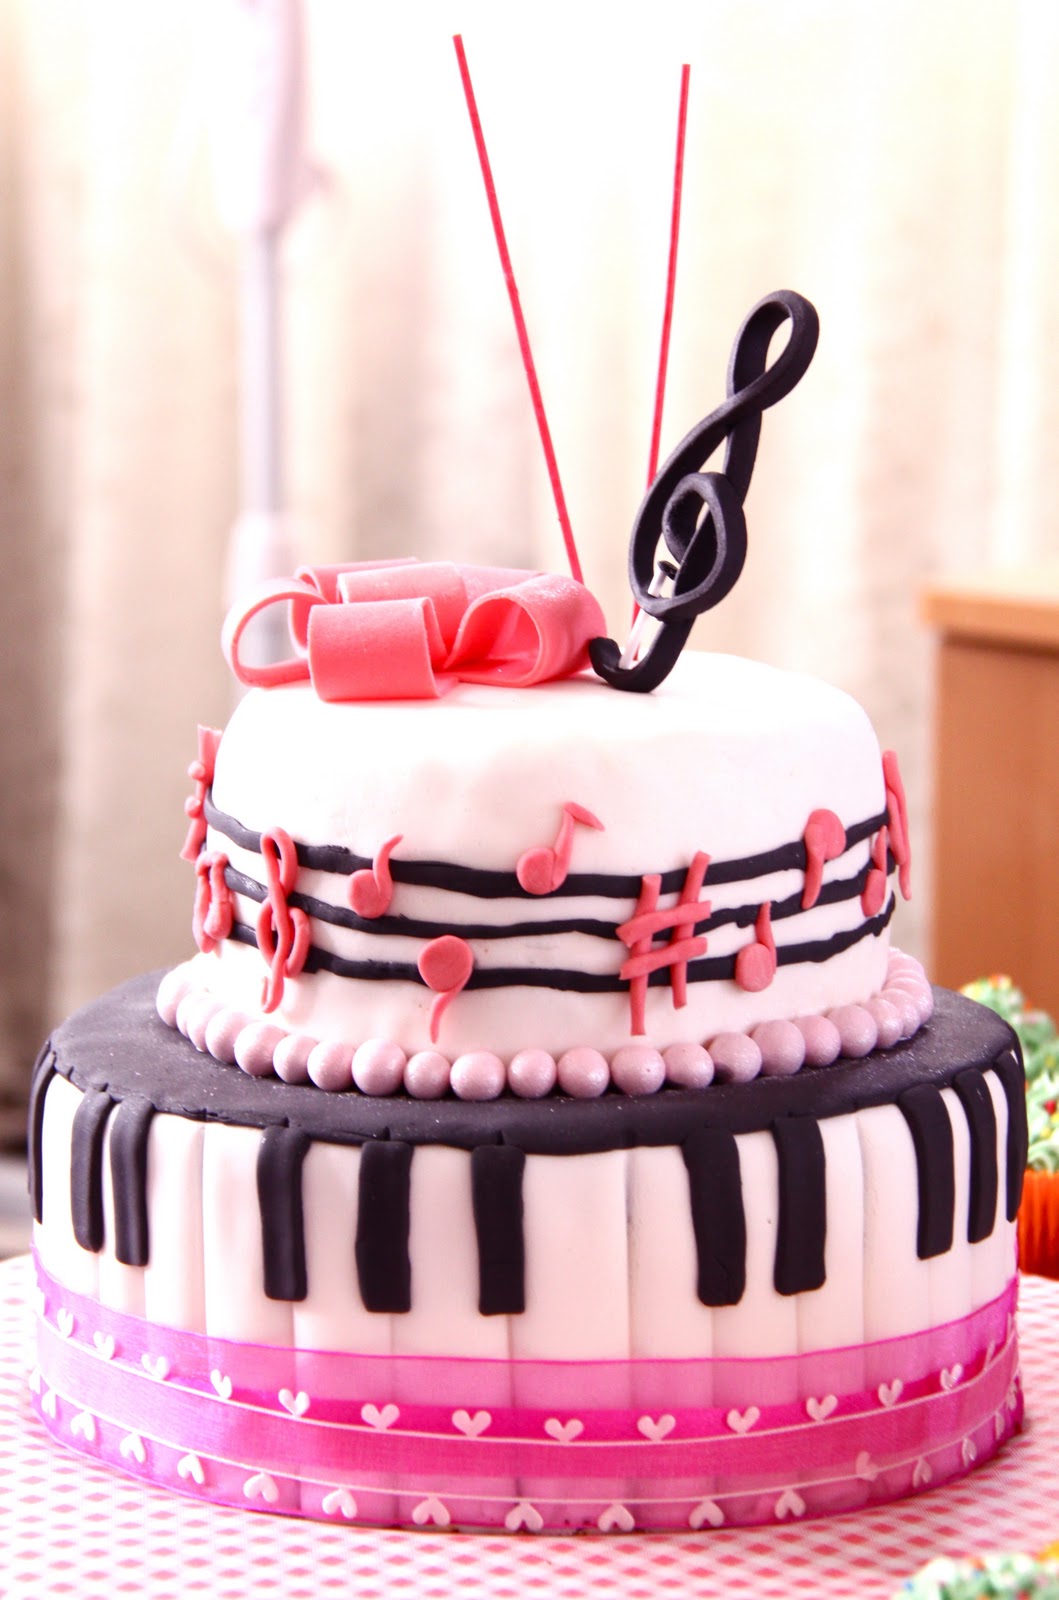 Sweet Art Cakes by Milbreé Moments Rikka's musical